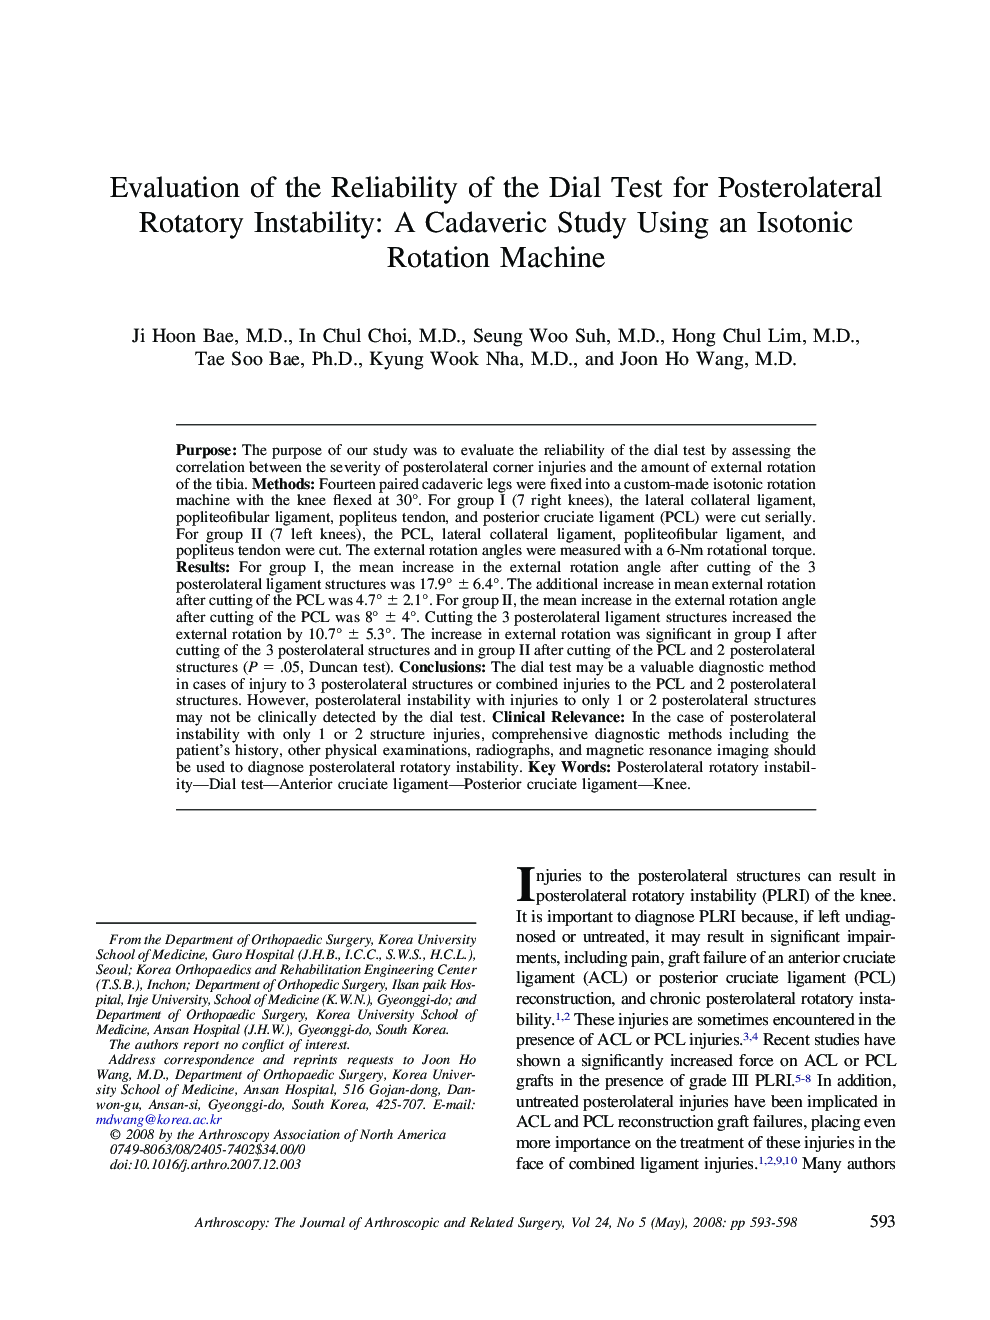 Evaluation of the Reliability of the Dial Test for Posterolateral Rotatory Instability: A Cadaveric Study Using an Isotonic Rotation Machine 